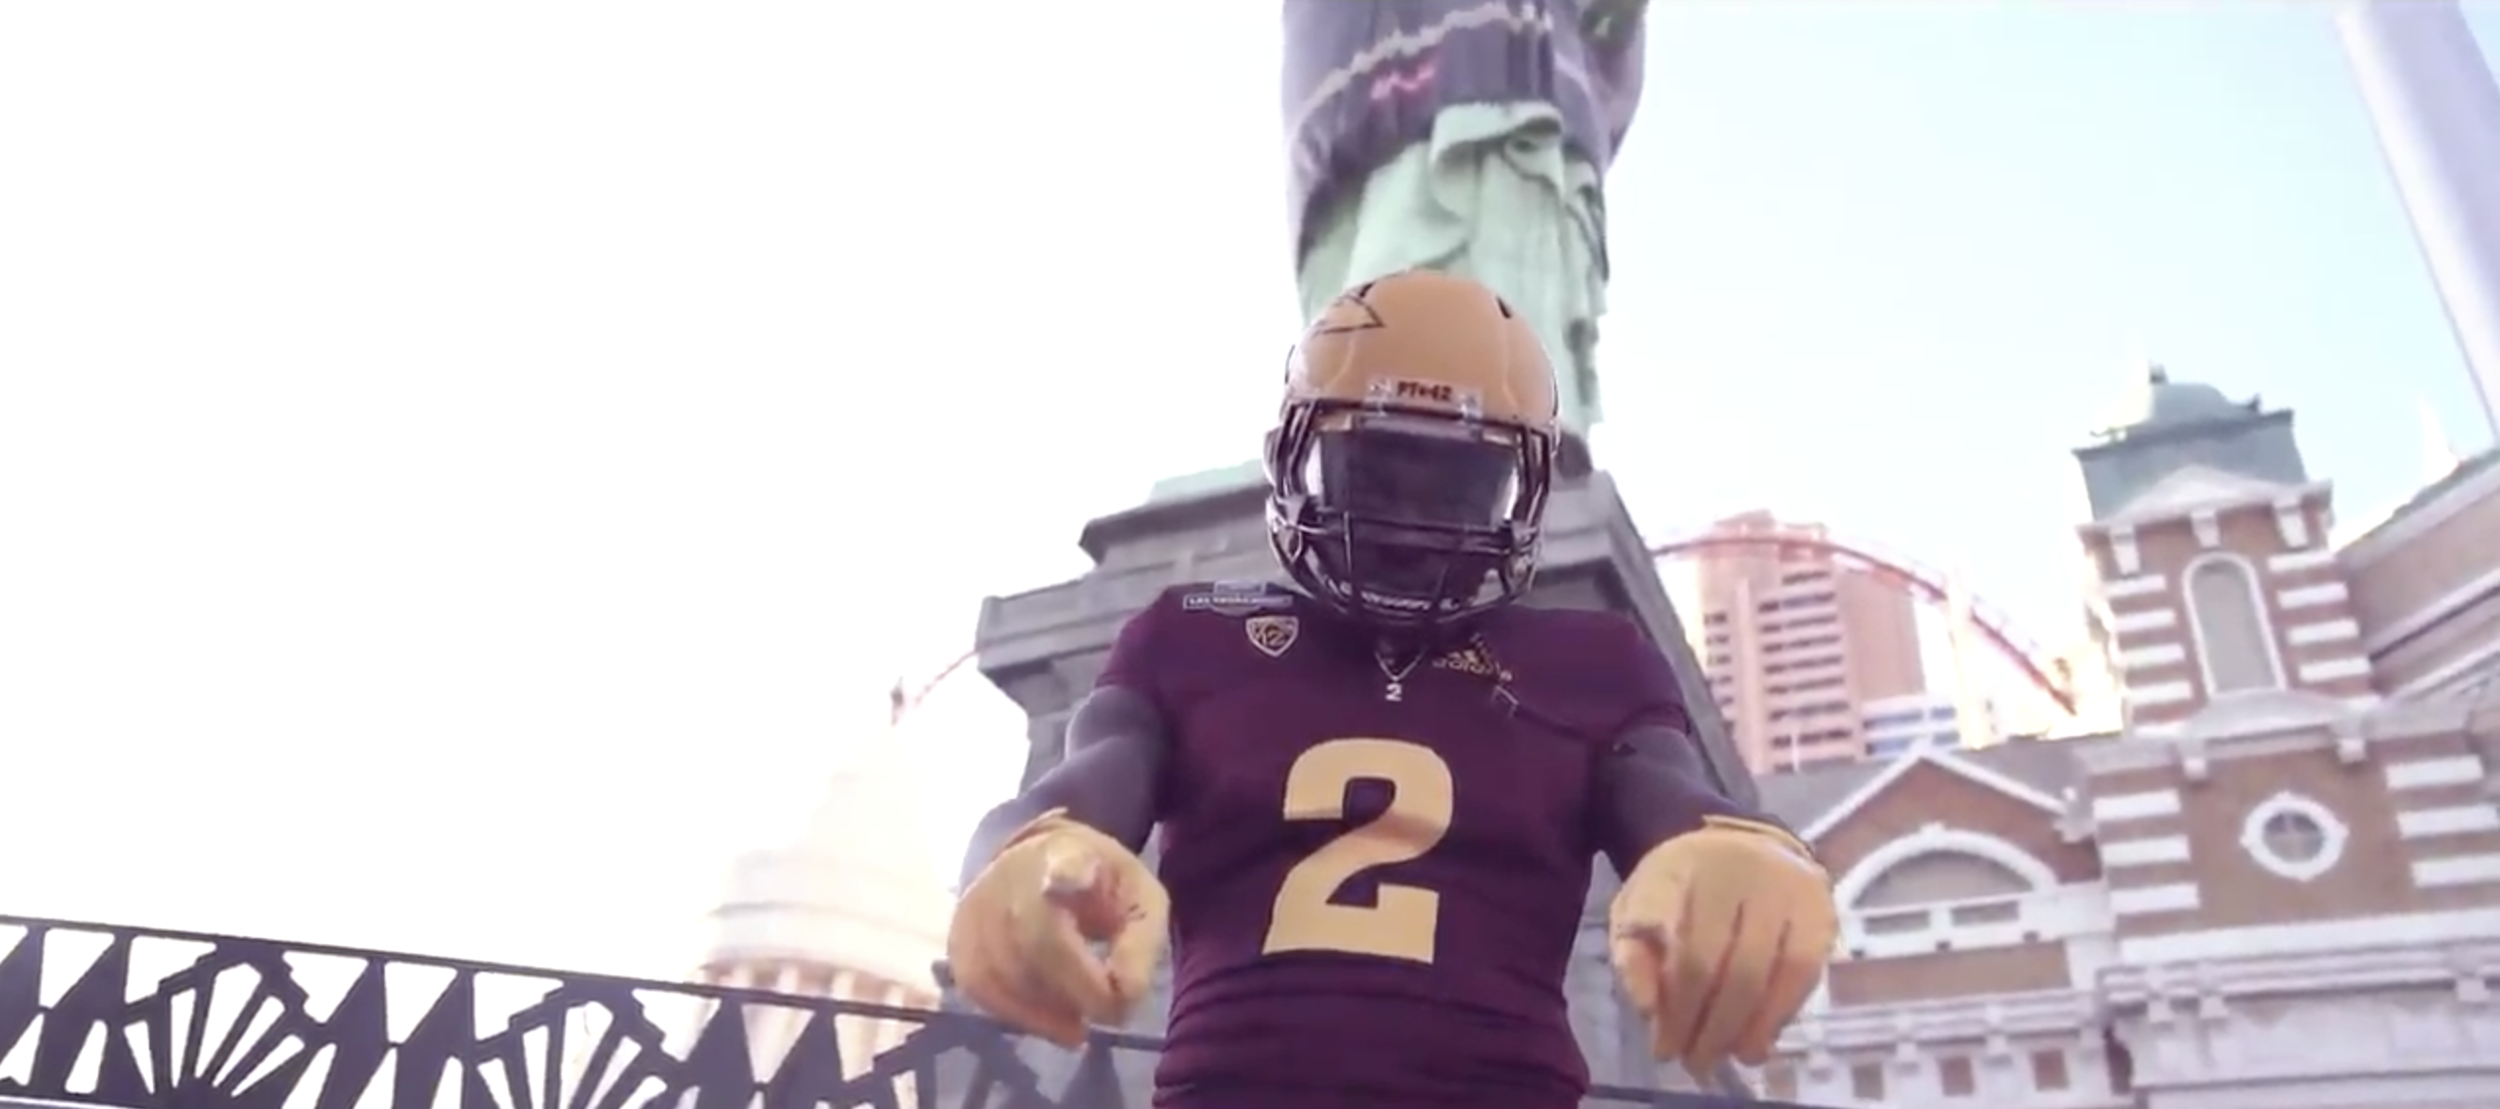 Gophers go for the gold (pants) with 100th season throwback uniforms